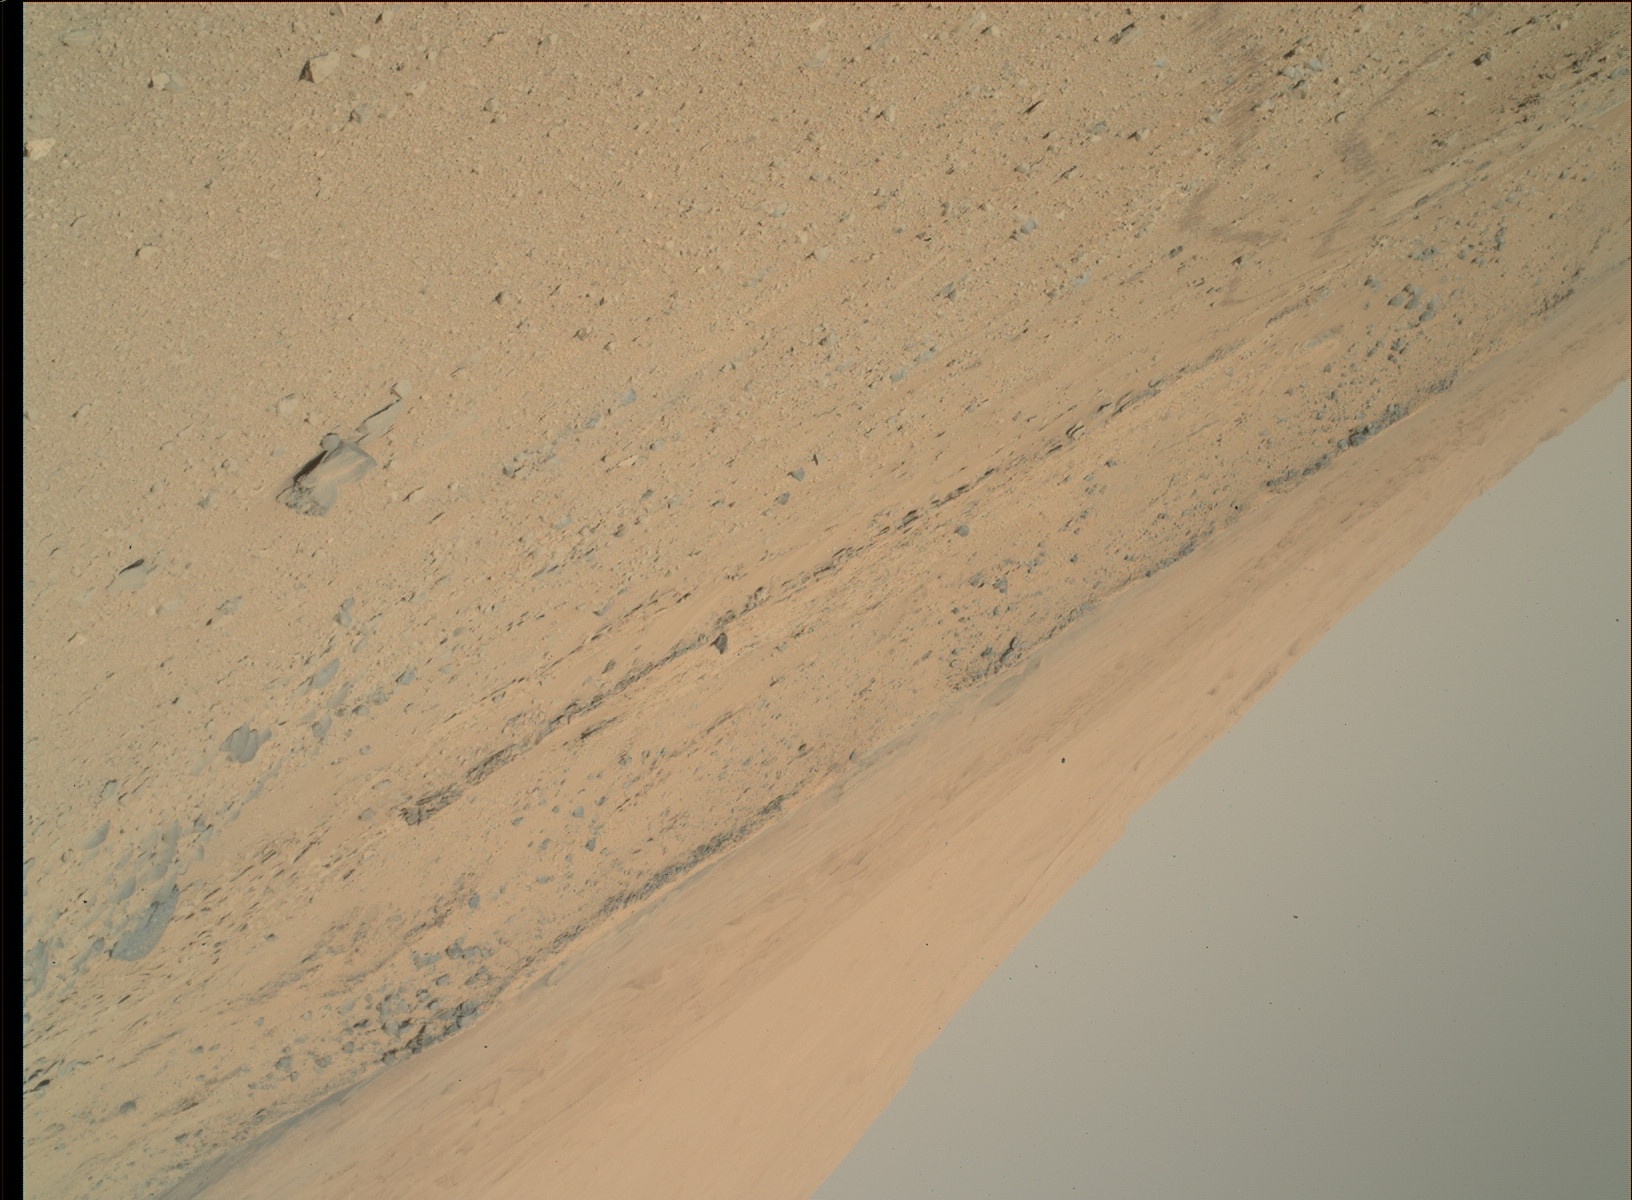 Nasa's Mars rover Curiosity acquired this image using its Mars Hand Lens Imager (MAHLI) on Sol 541